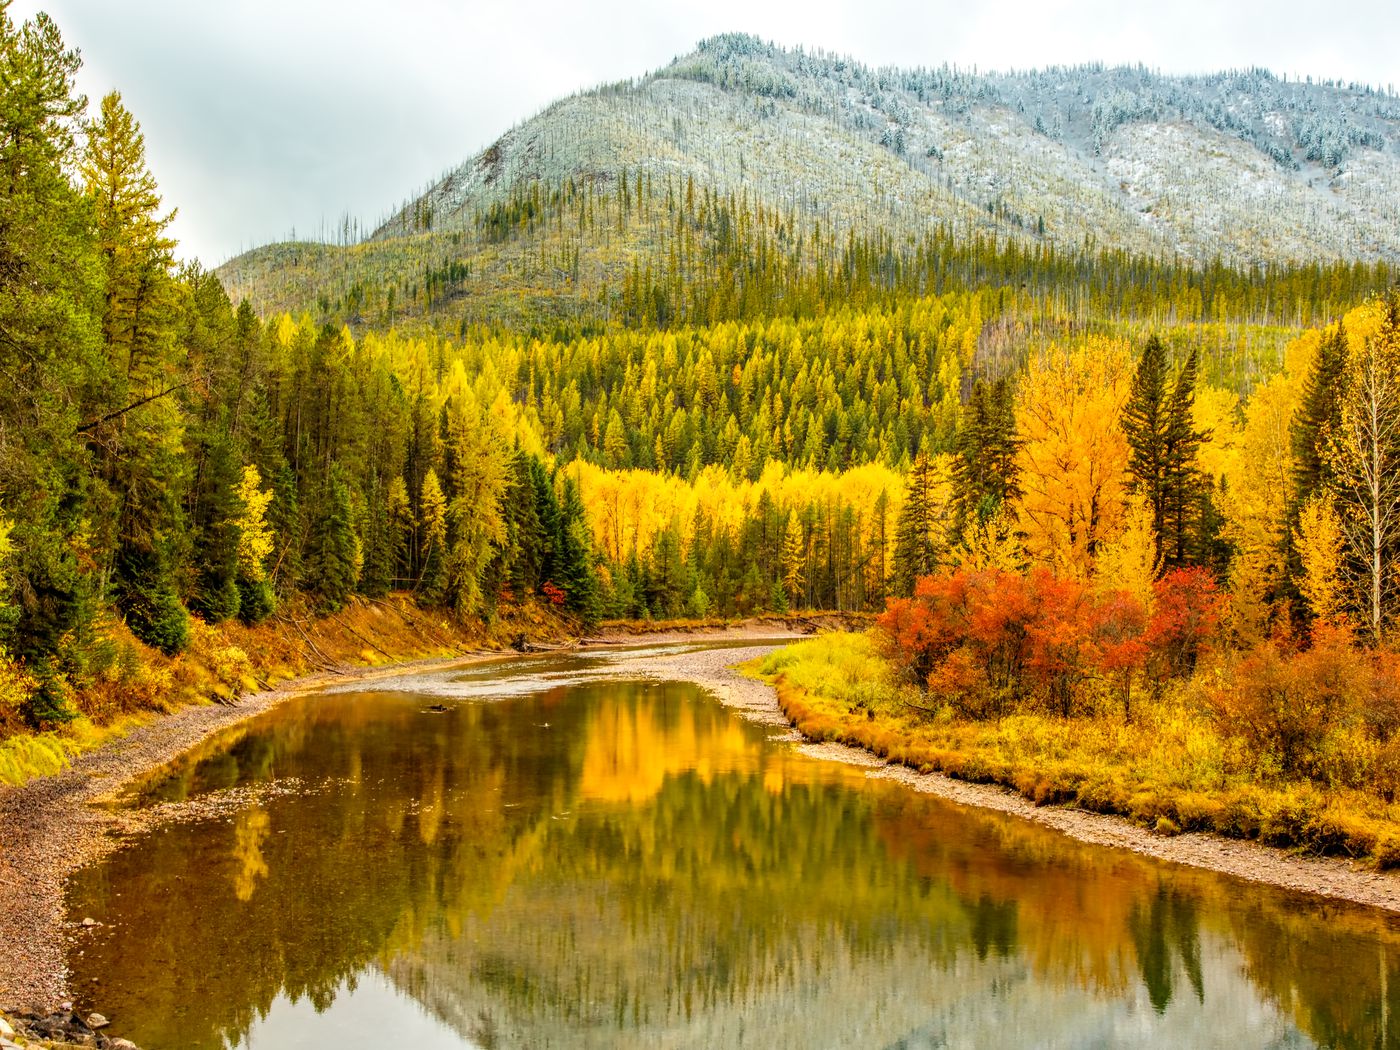 Where to see fall colors: 11 best national parks to visit in autumn